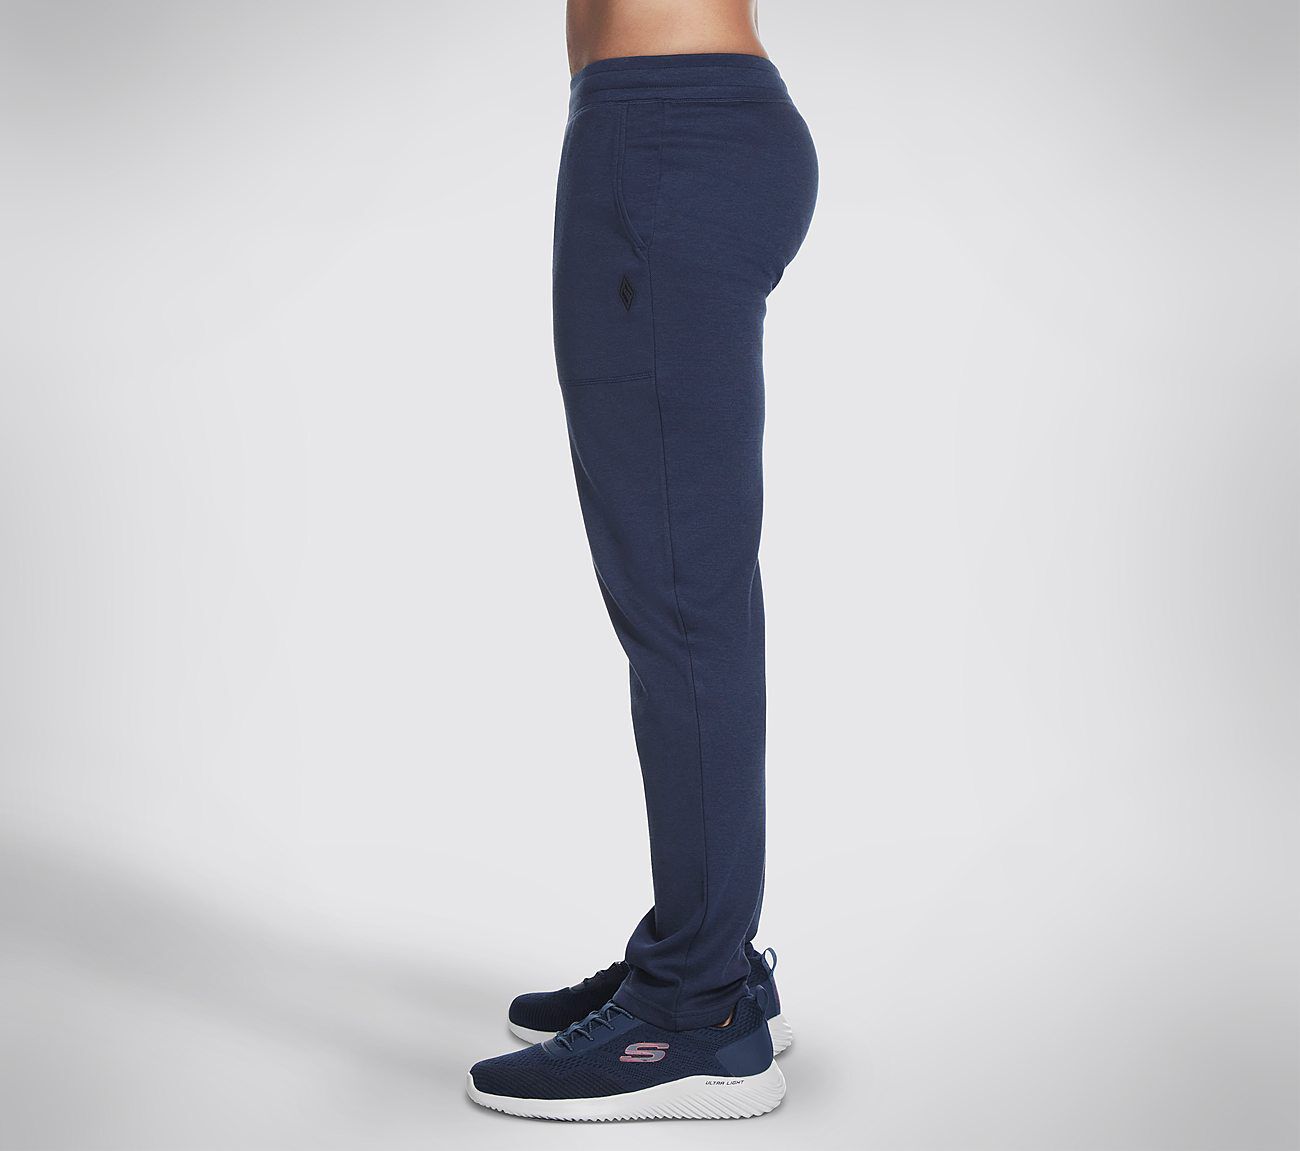 Sale  Mens Skechers Pants offers up to 60  Stylight